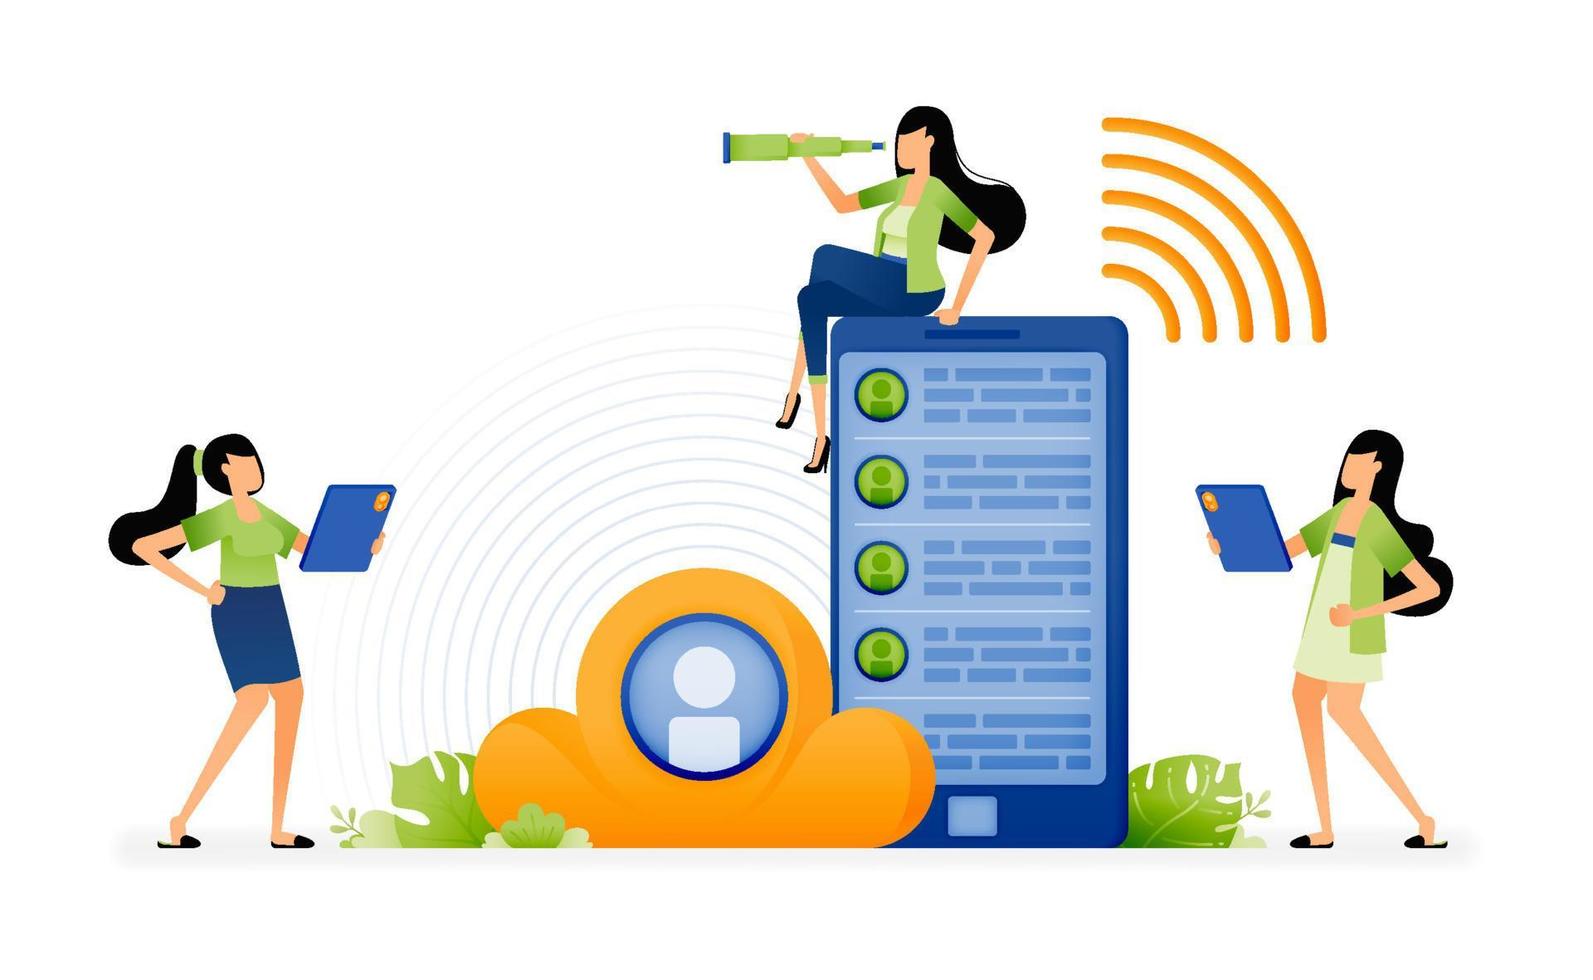 illustration of ease of communicating with a smartphone with mobile cloud technology connected to an internet network connection. design can be used for landing page, startup apps, web page, ads vector